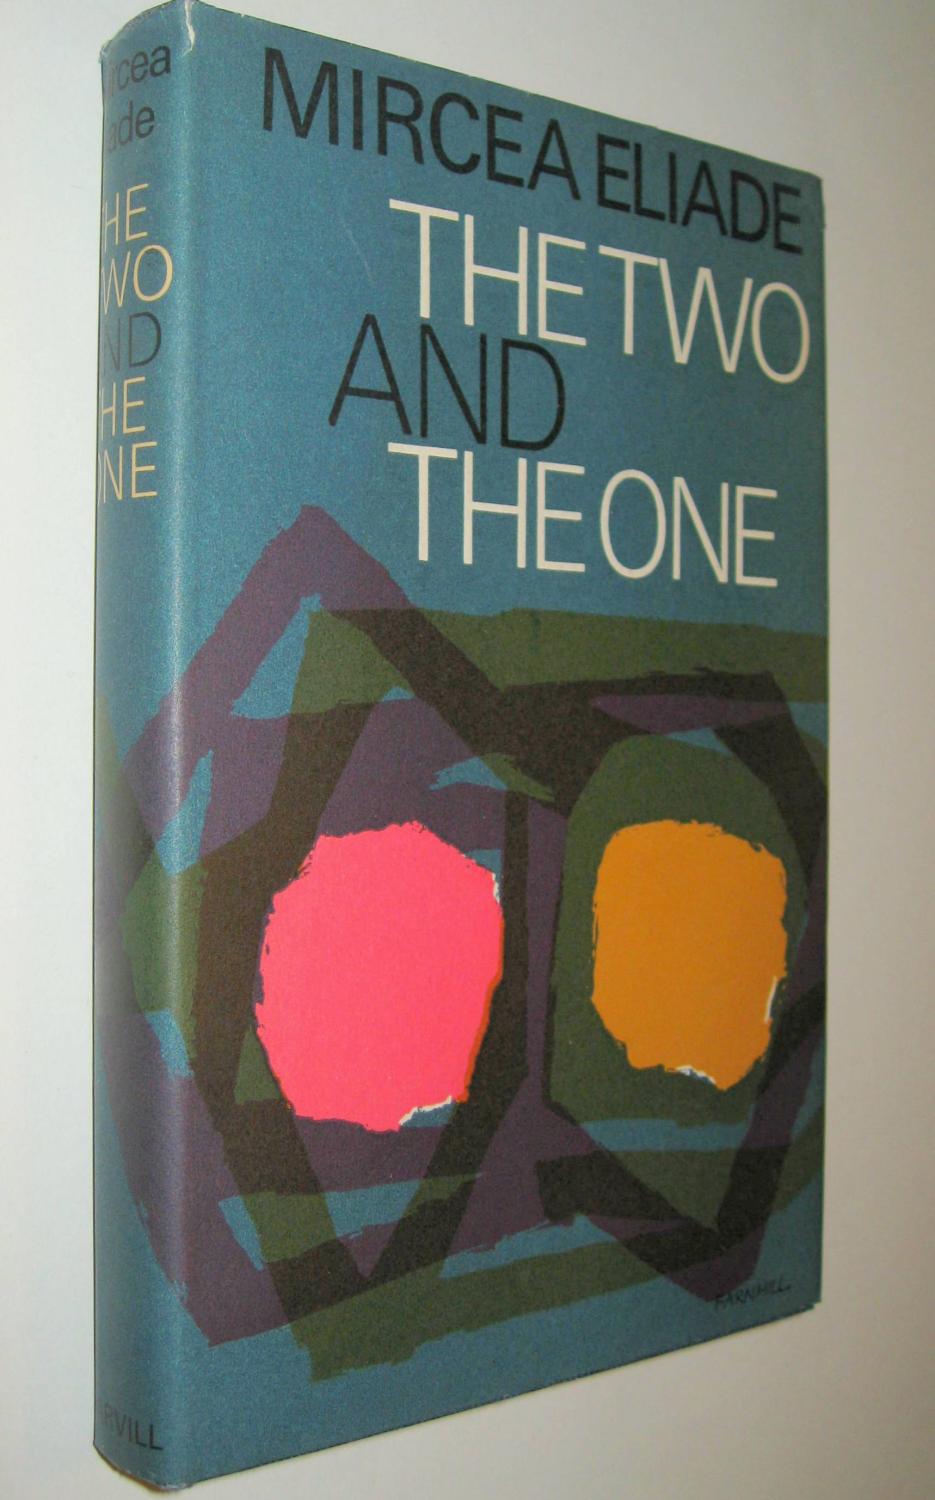 Cover of The Two and the One, by Mircea Eliade